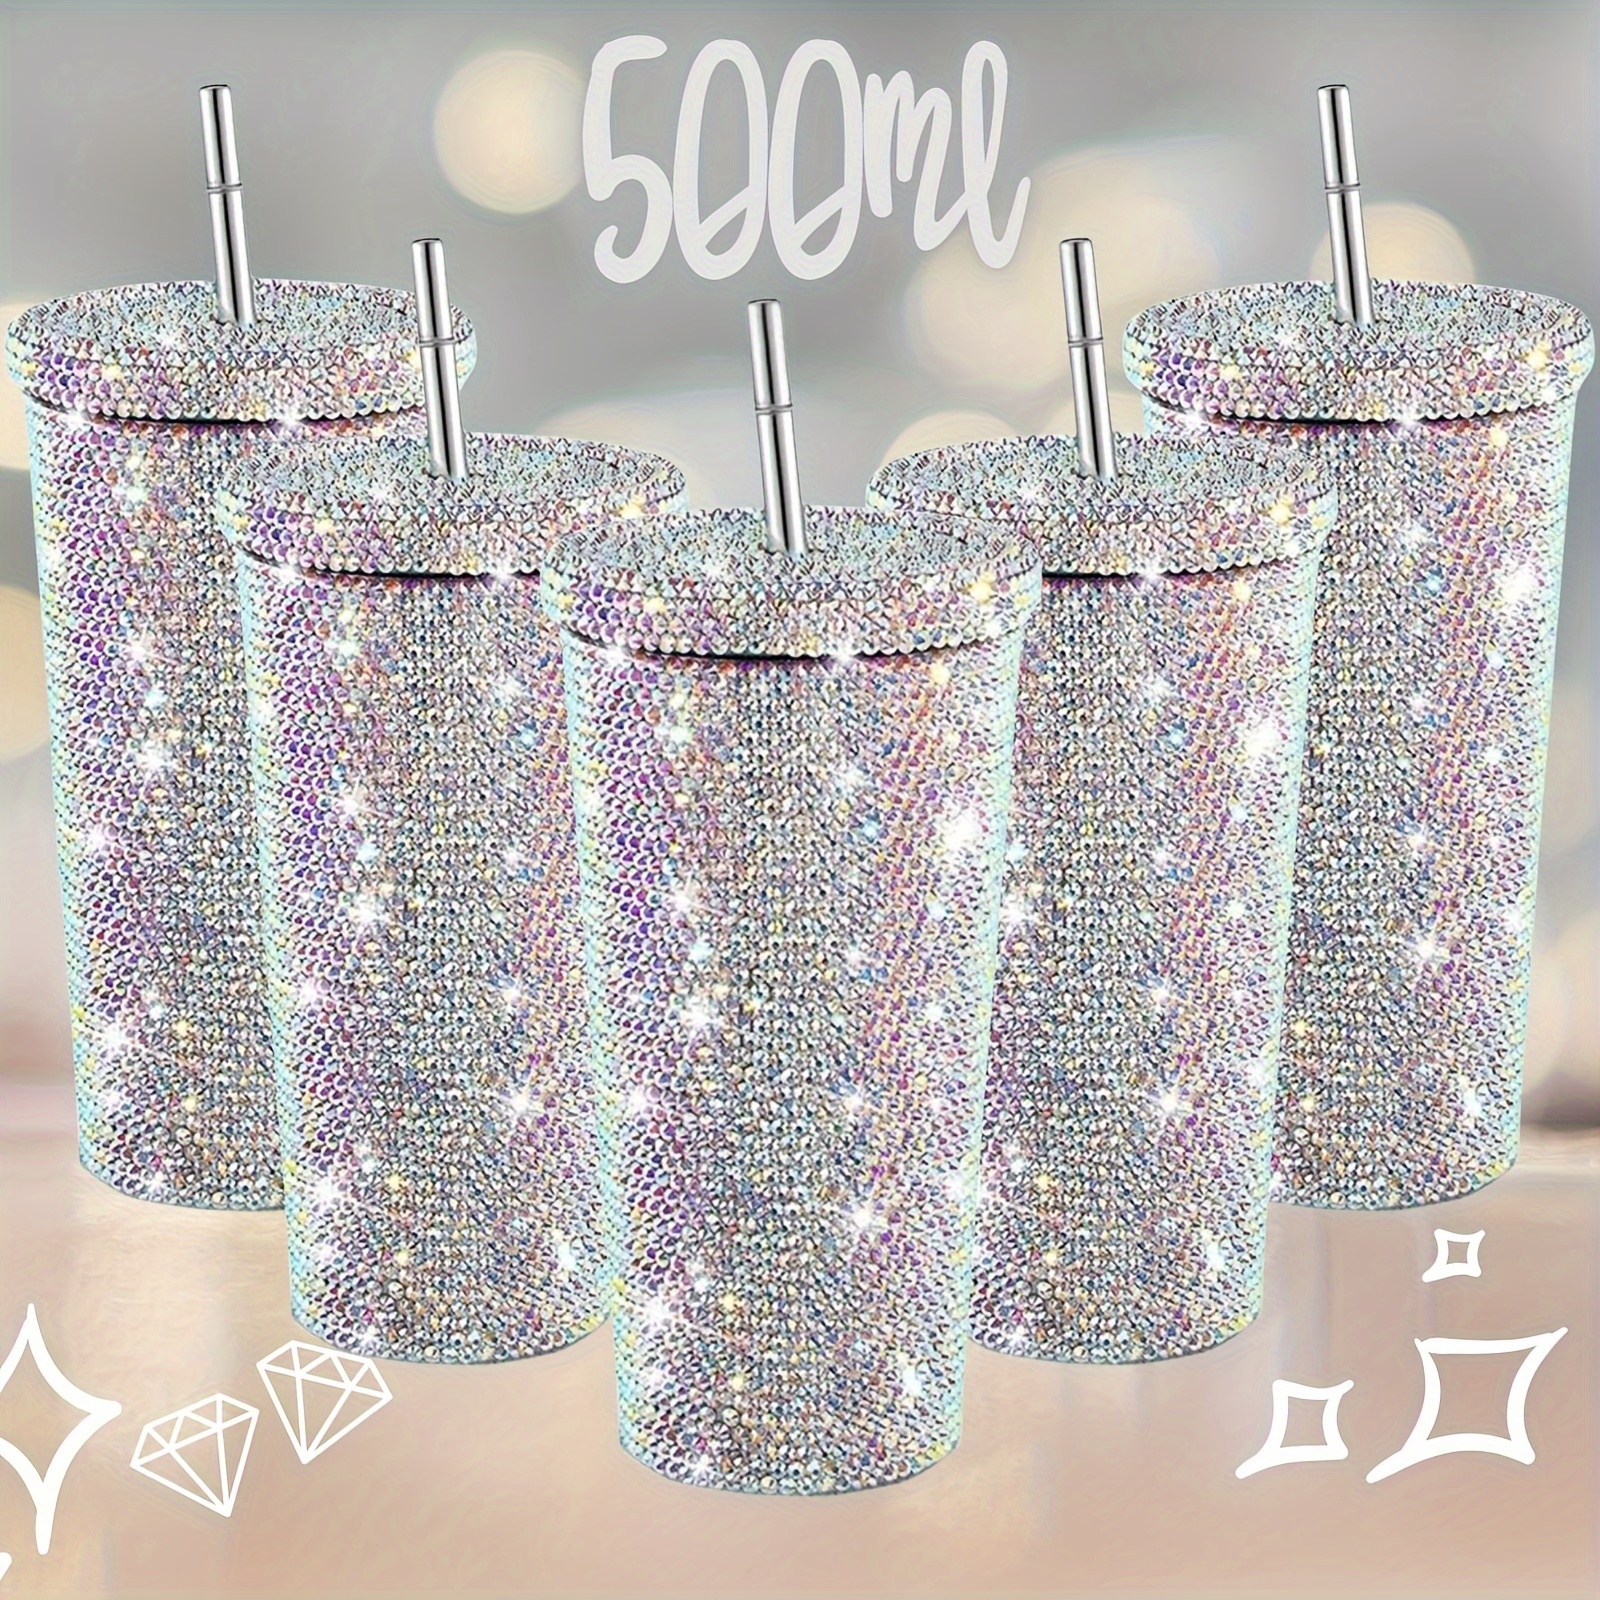 

500ml Rhinestone Stainless Steel Water Bottle With Straw, Double-wall Insulated, Bpa Free, Hand Wash - Glittering Diamond Vacuum For Outdoor Camping, Hiking, Driving & Travel With Cleaning Brushes